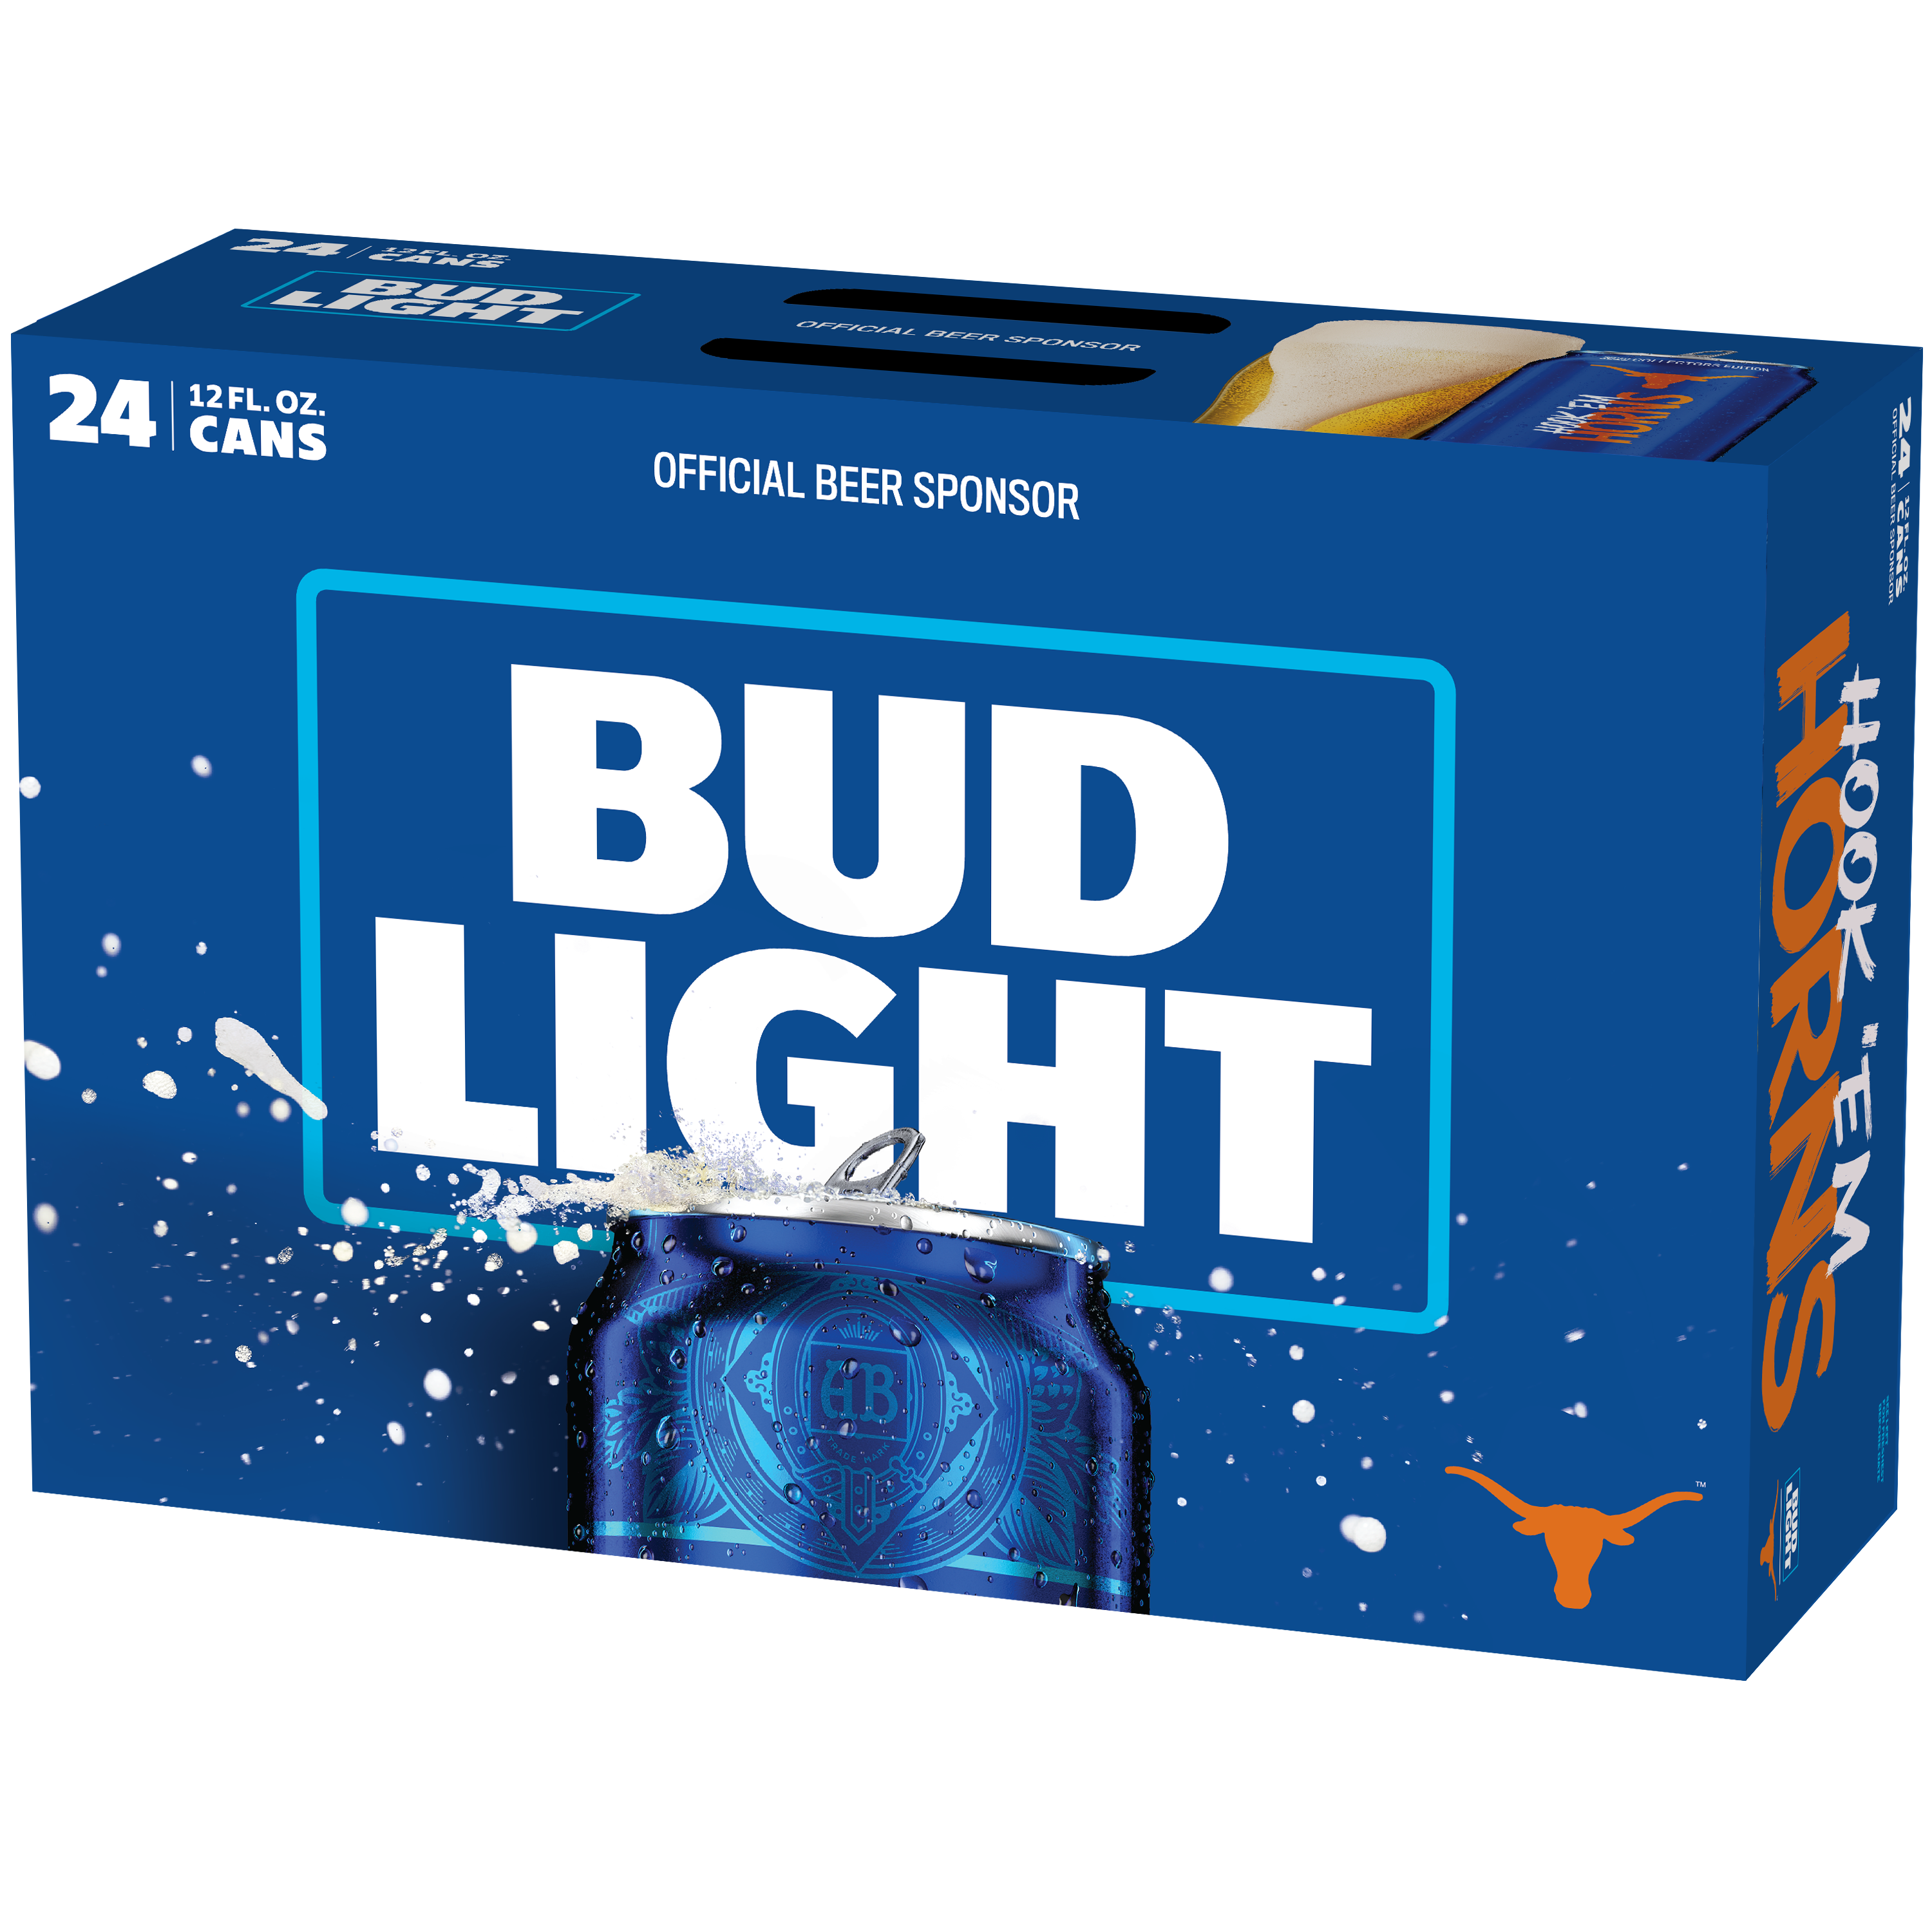 HOOK `EM HORNS! ANHEUSER-BUSCH BECOMES EXCLUSIVE DOMESTIC & CRAFT BEER SPONSOR OF THE UNIVERSITY OF TEXAS AT AUSTIN ATHLETICS